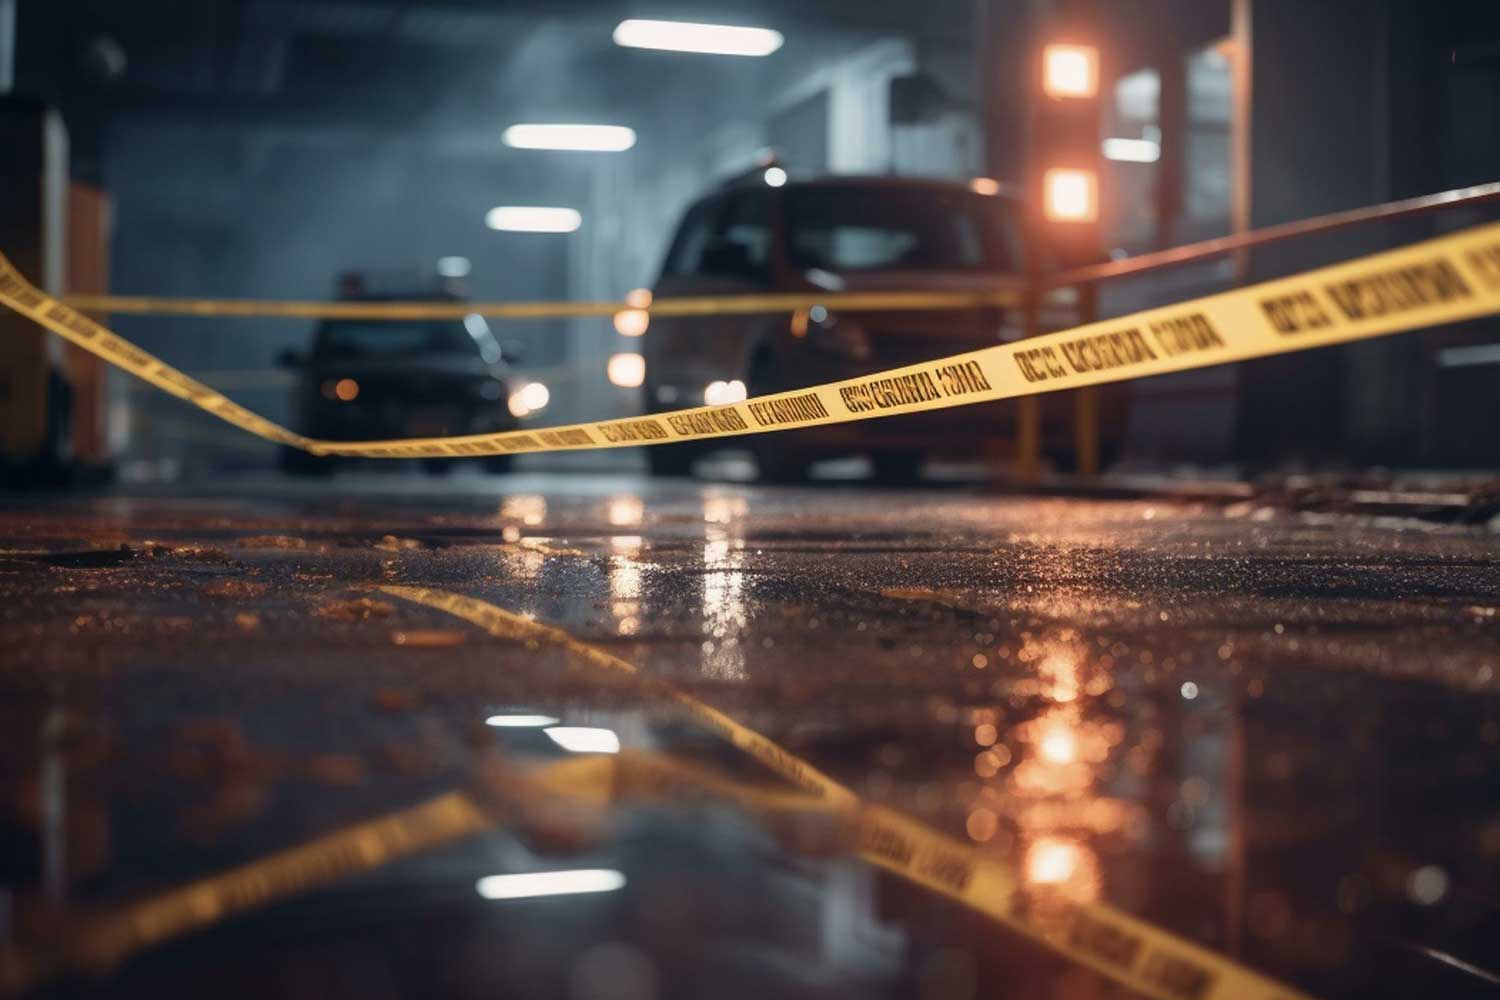 Yellow police tape surrounds a crime scene